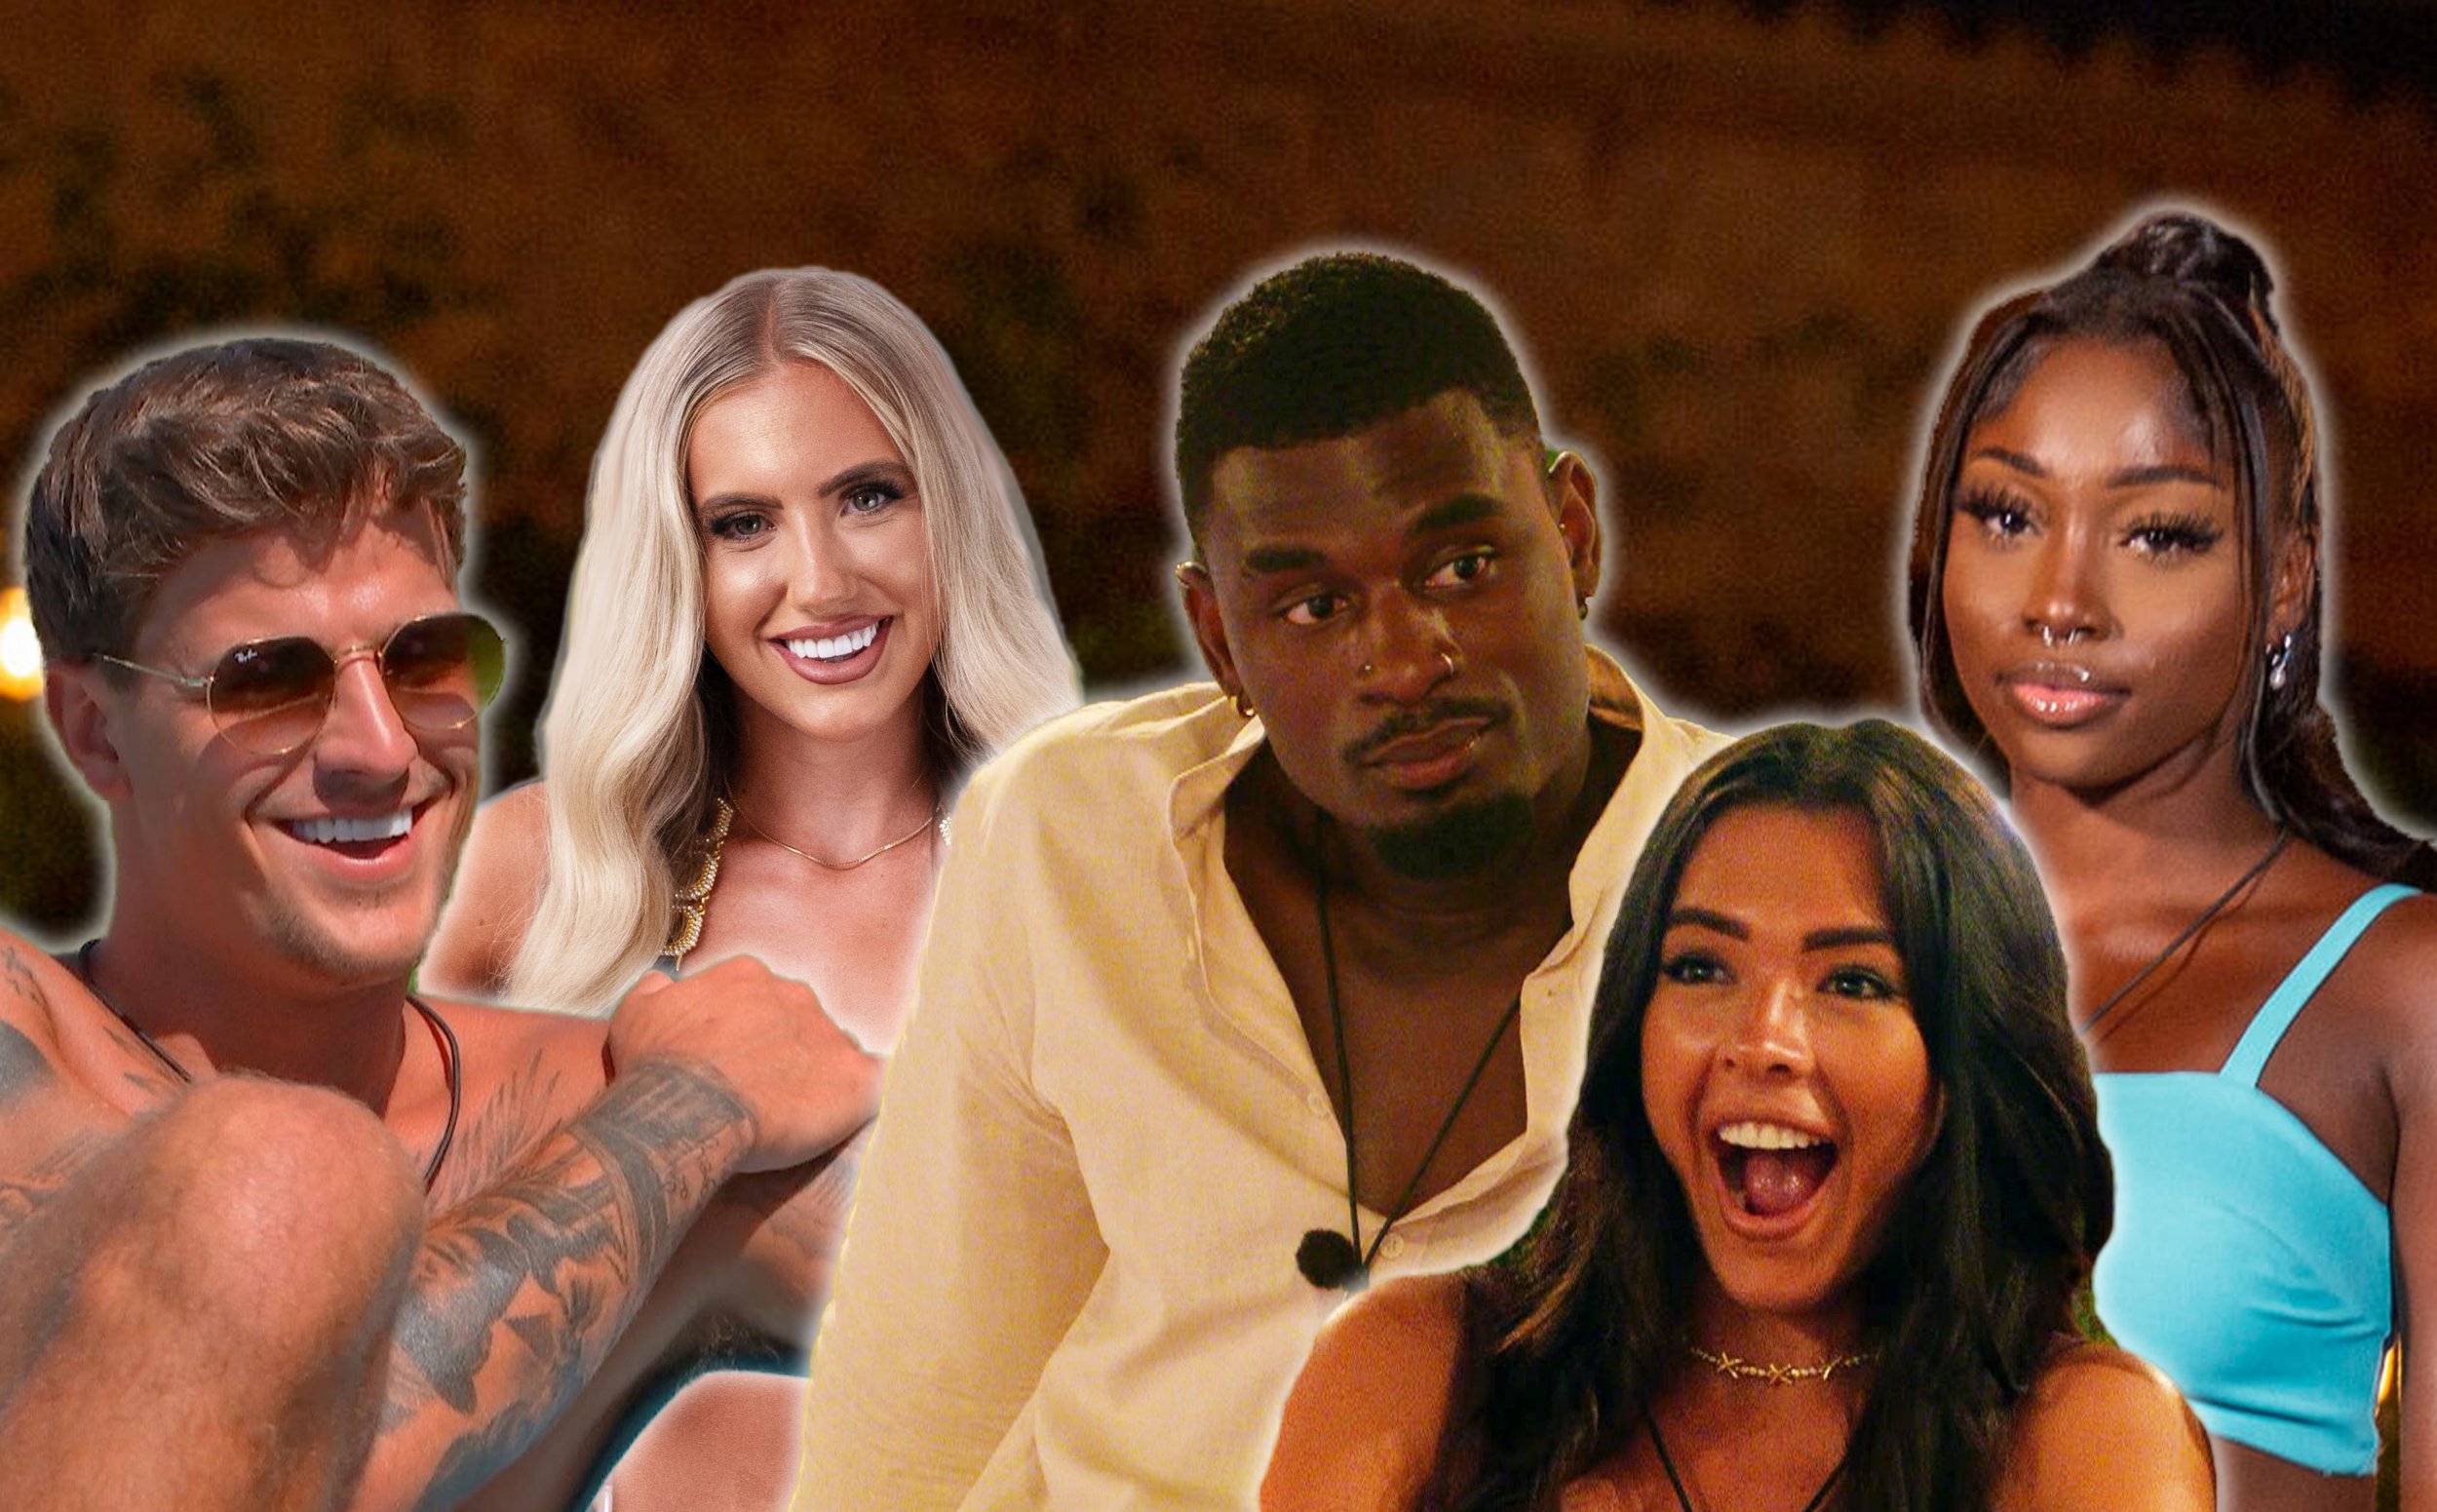 Love Island spoilers: Dami Hope admits ‘we’re in trouble’ as Luca Bish eyes up newcomer Mollie Salmon